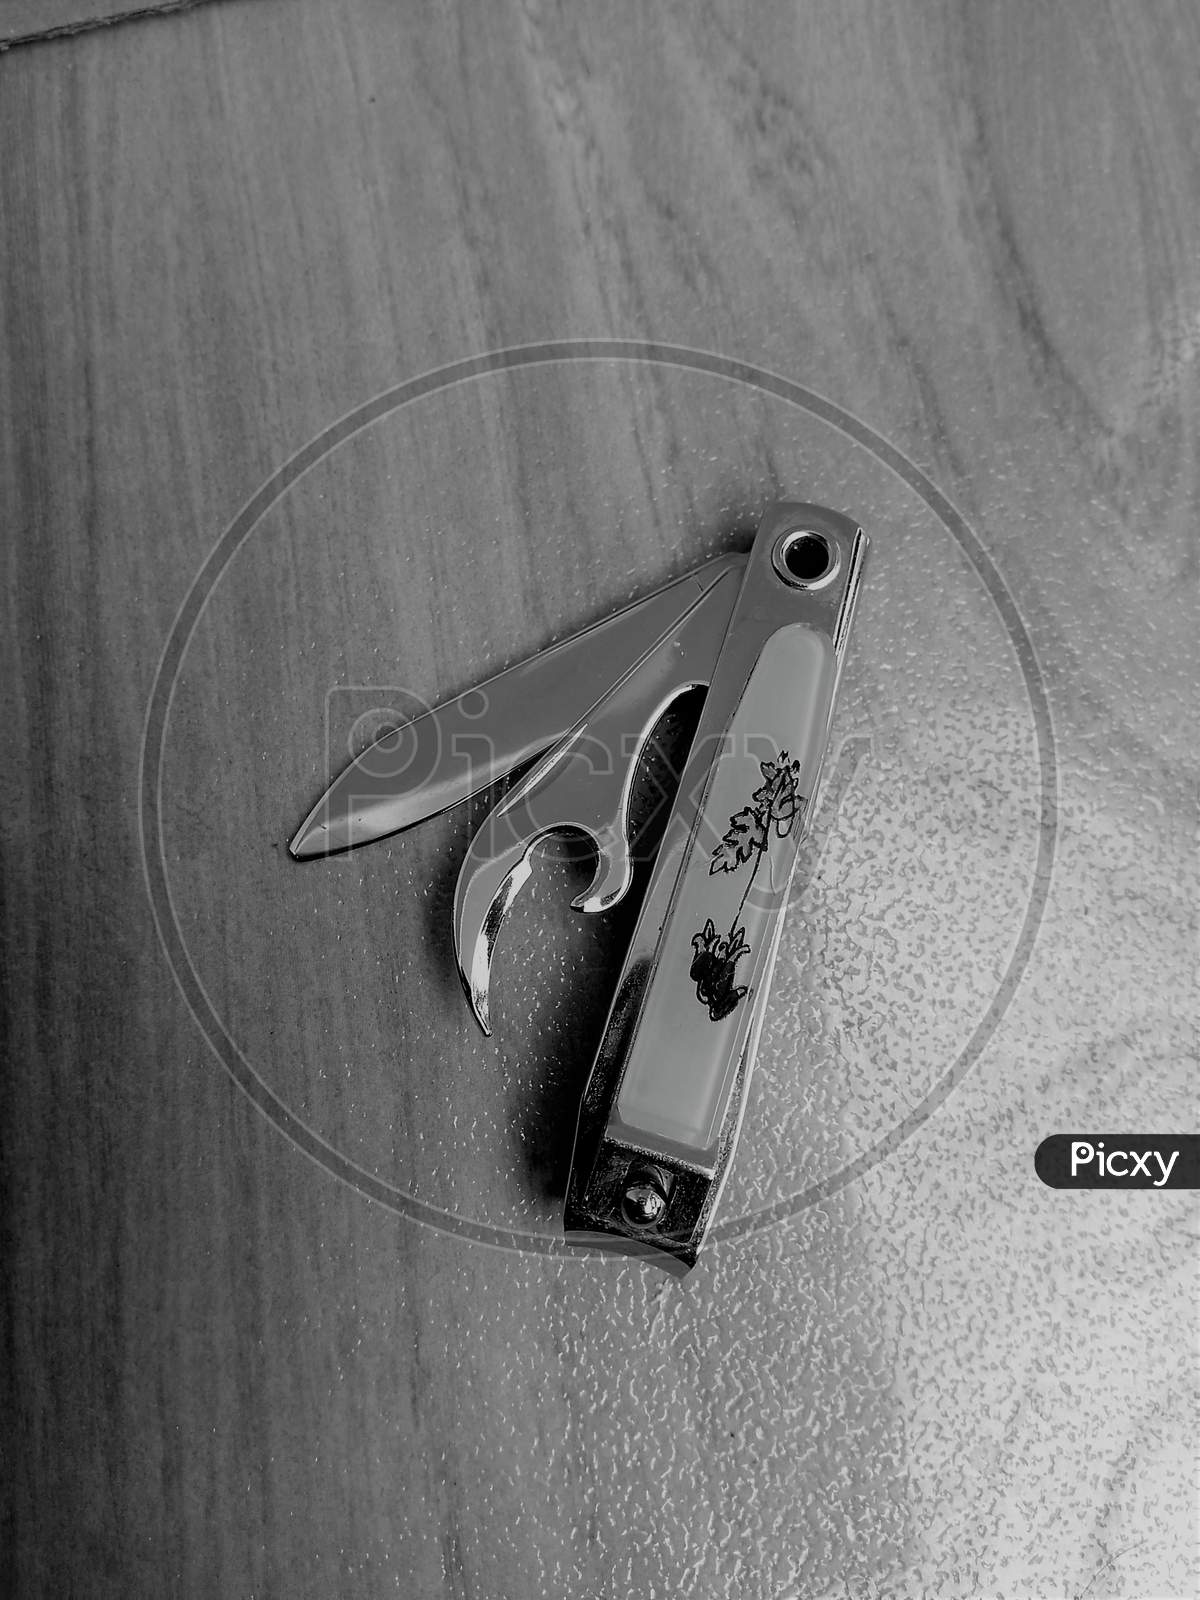 A nail clipper (also called nail clippers, a nail trimmer, a nail cutter or nipper type) is a hand tool used to trim fingernails, toenails and hangnails.